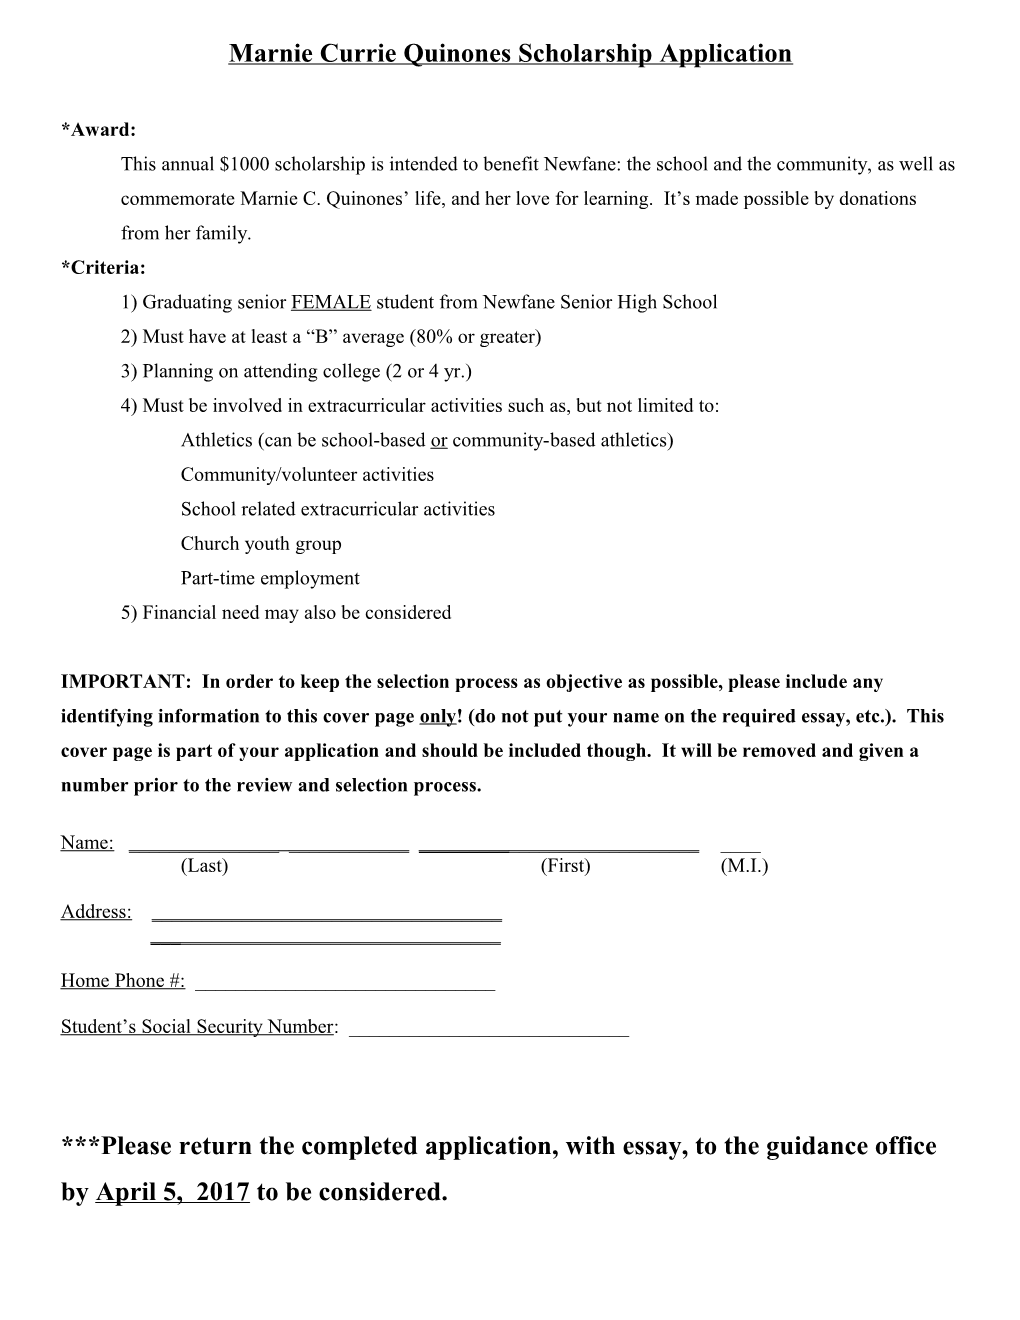 Marnie Currie Quinones Scholarship Application